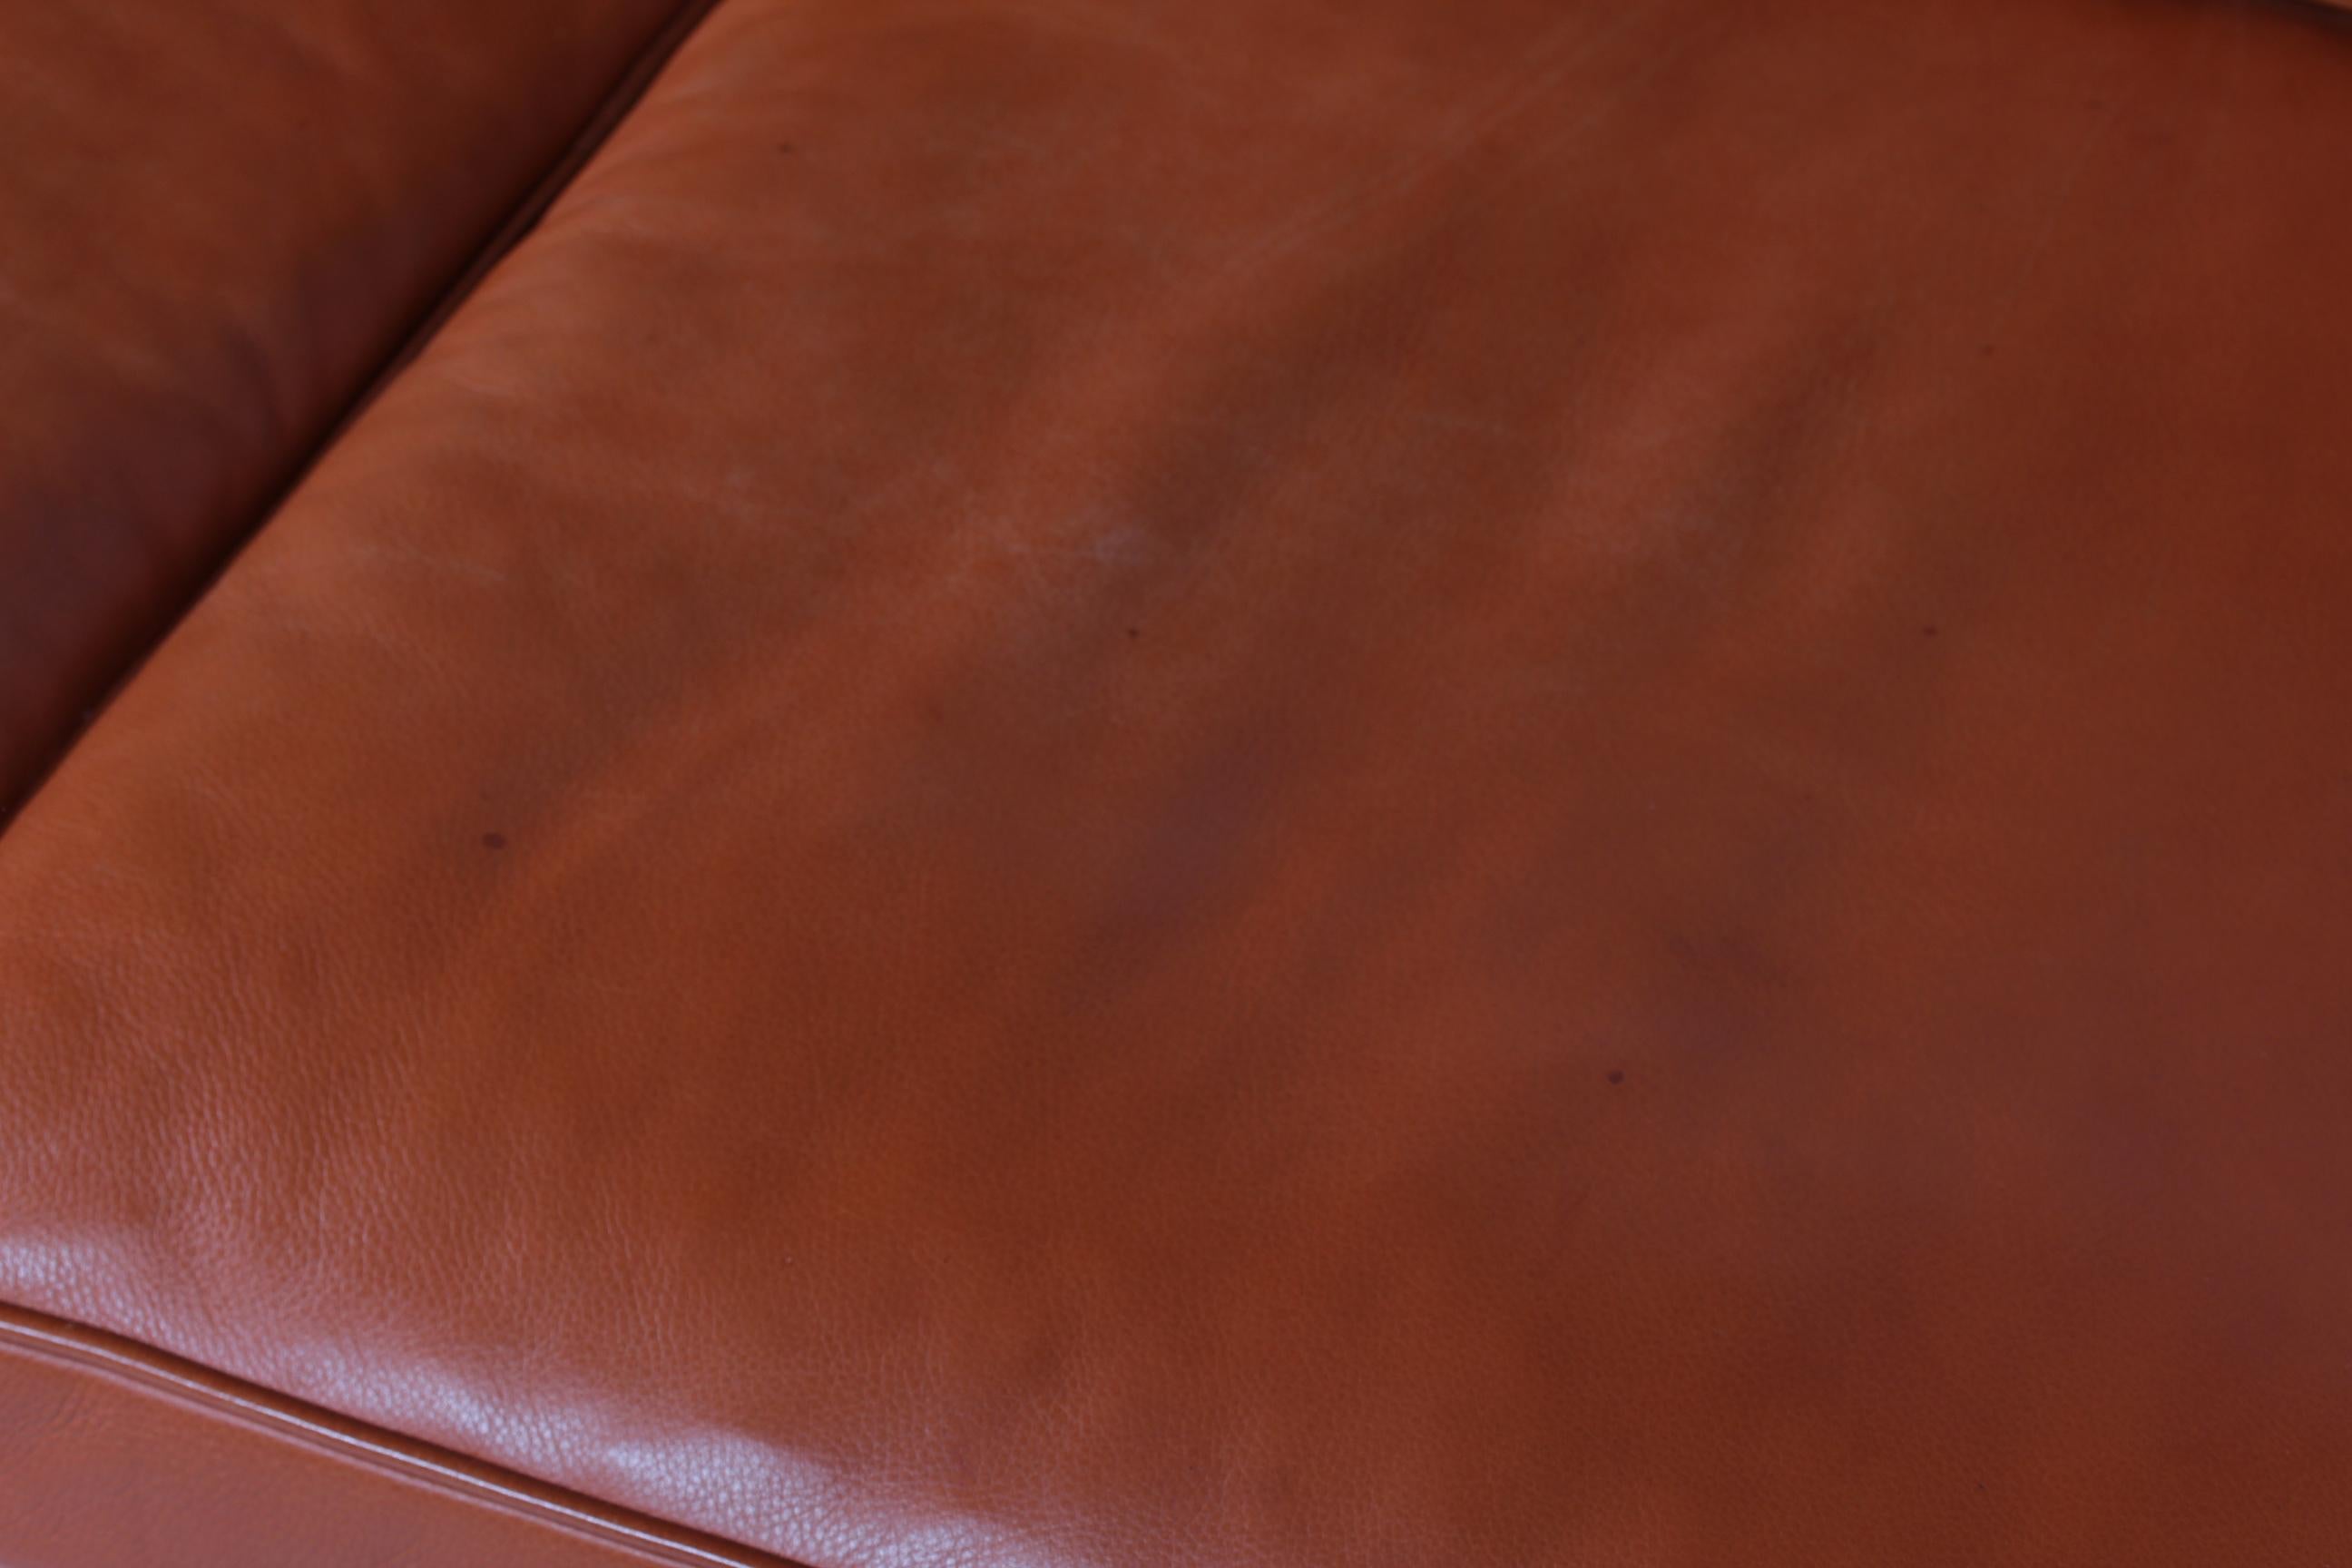 Mahogany Danish Modern 3-Seat Sofa by Grant Furniture with Cognac-Colored Leather 1980s